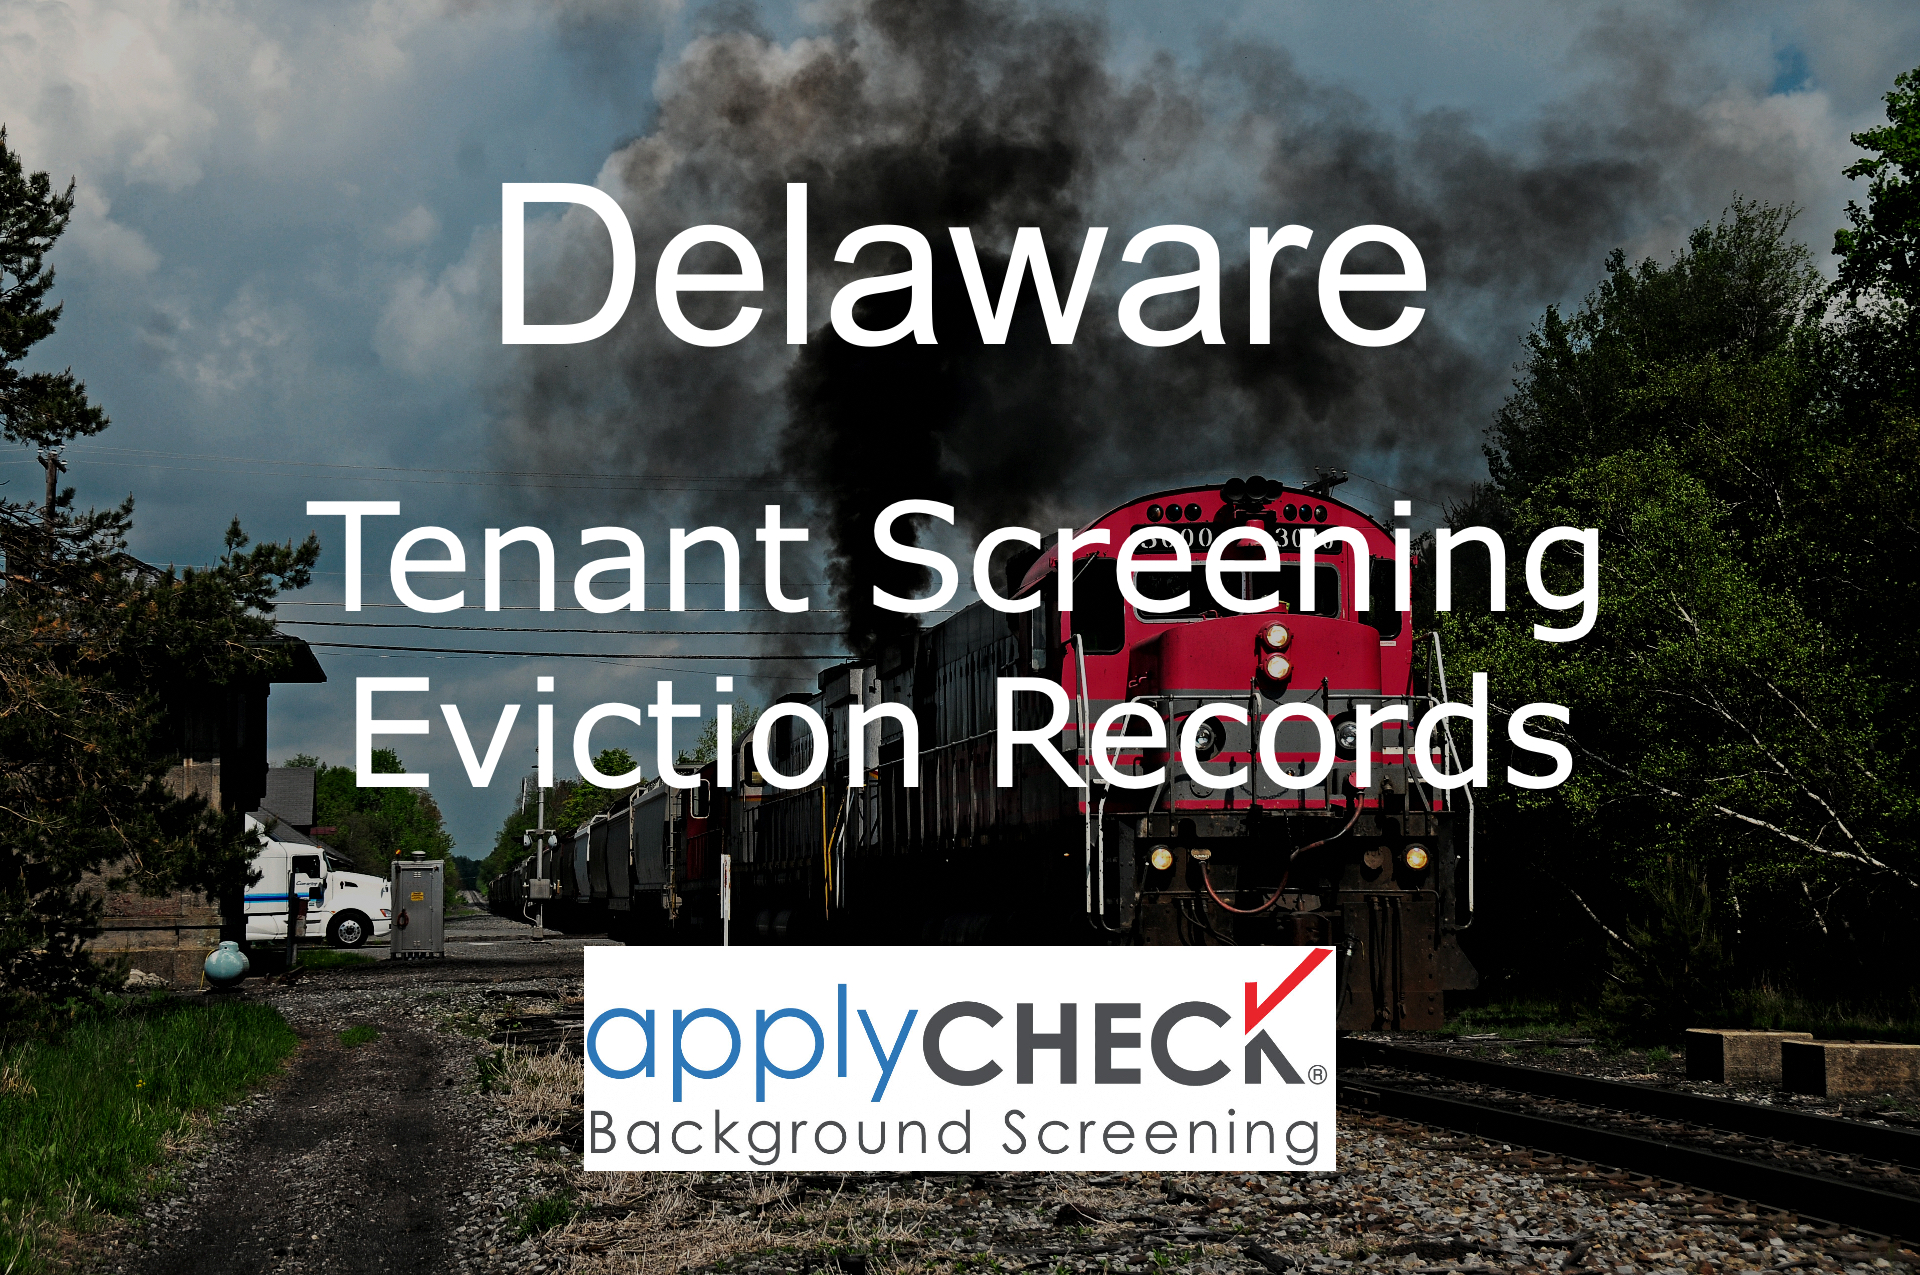 Delware Tenant Screening and Eviction image